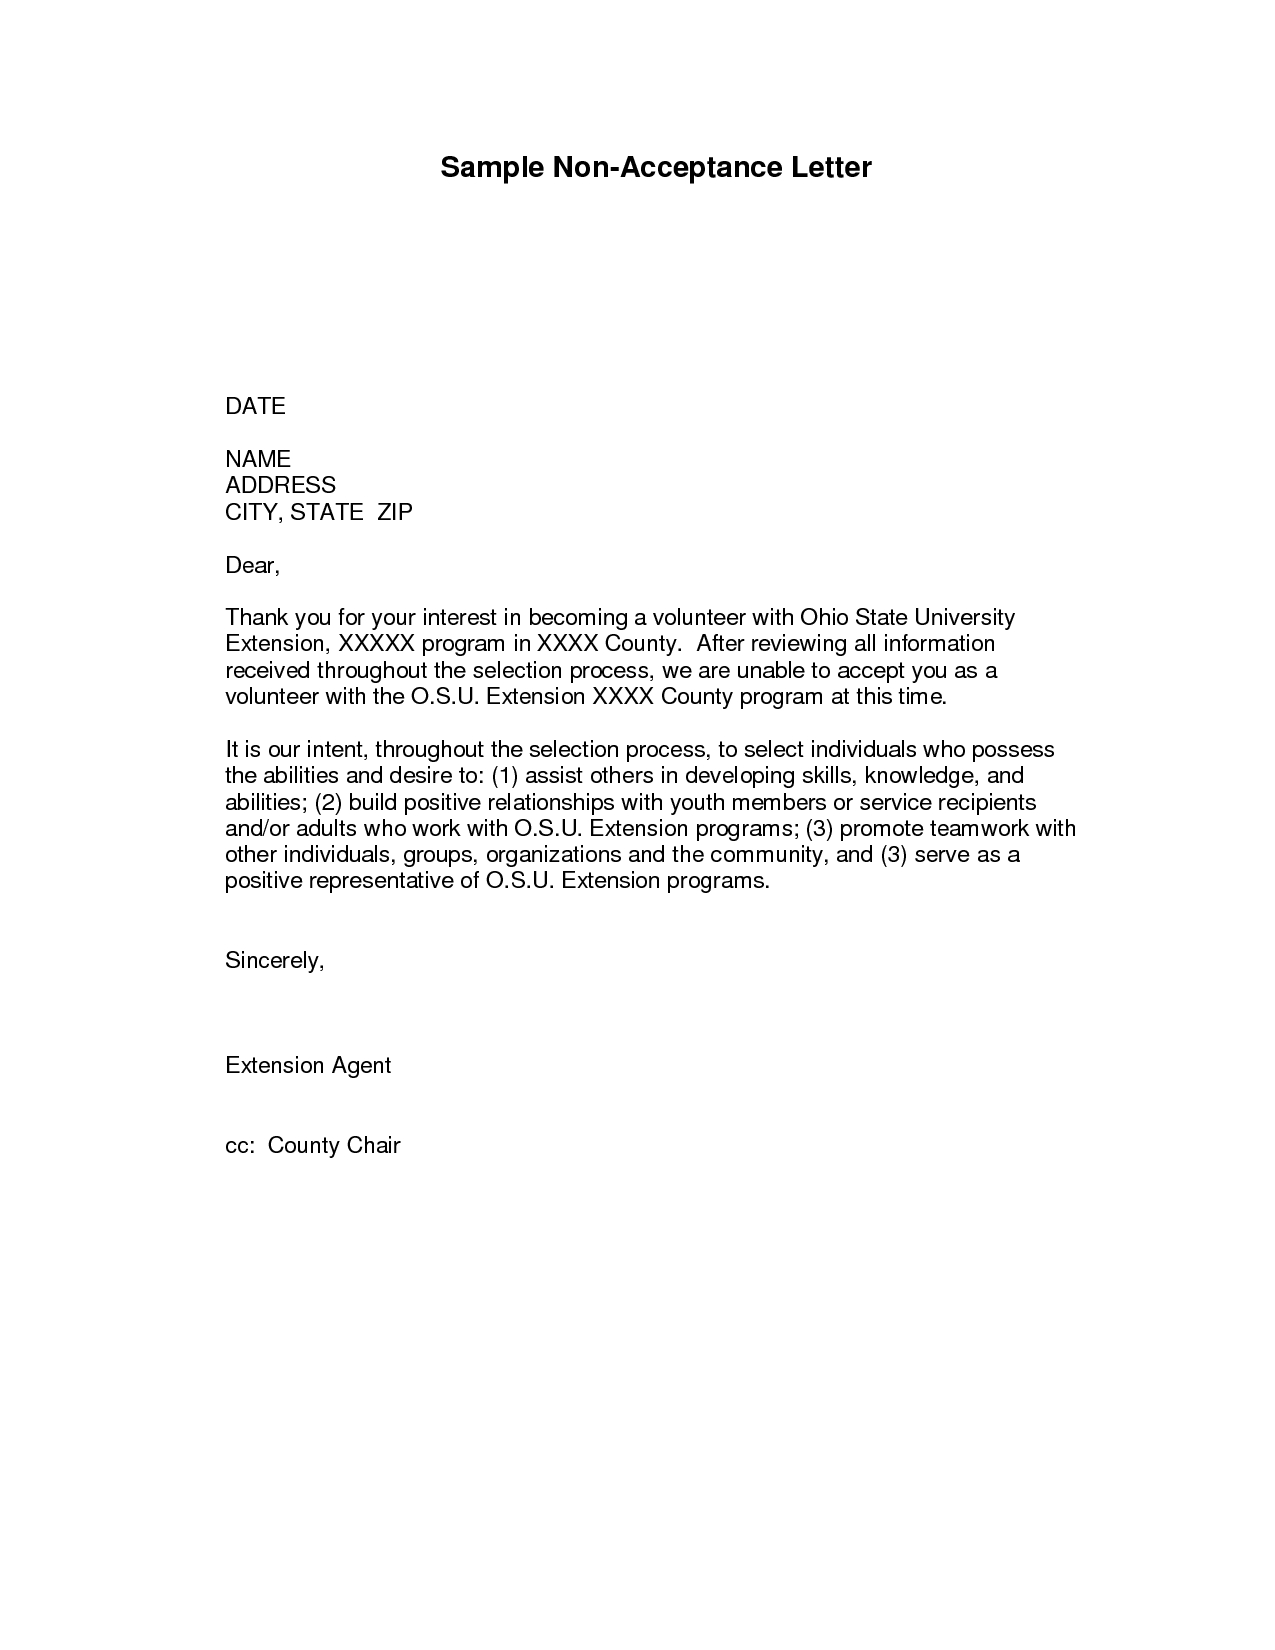 Business Proposal Acceptance Letter Template - Program Acceptance Letter Sample Letter Accepting An Offer Of